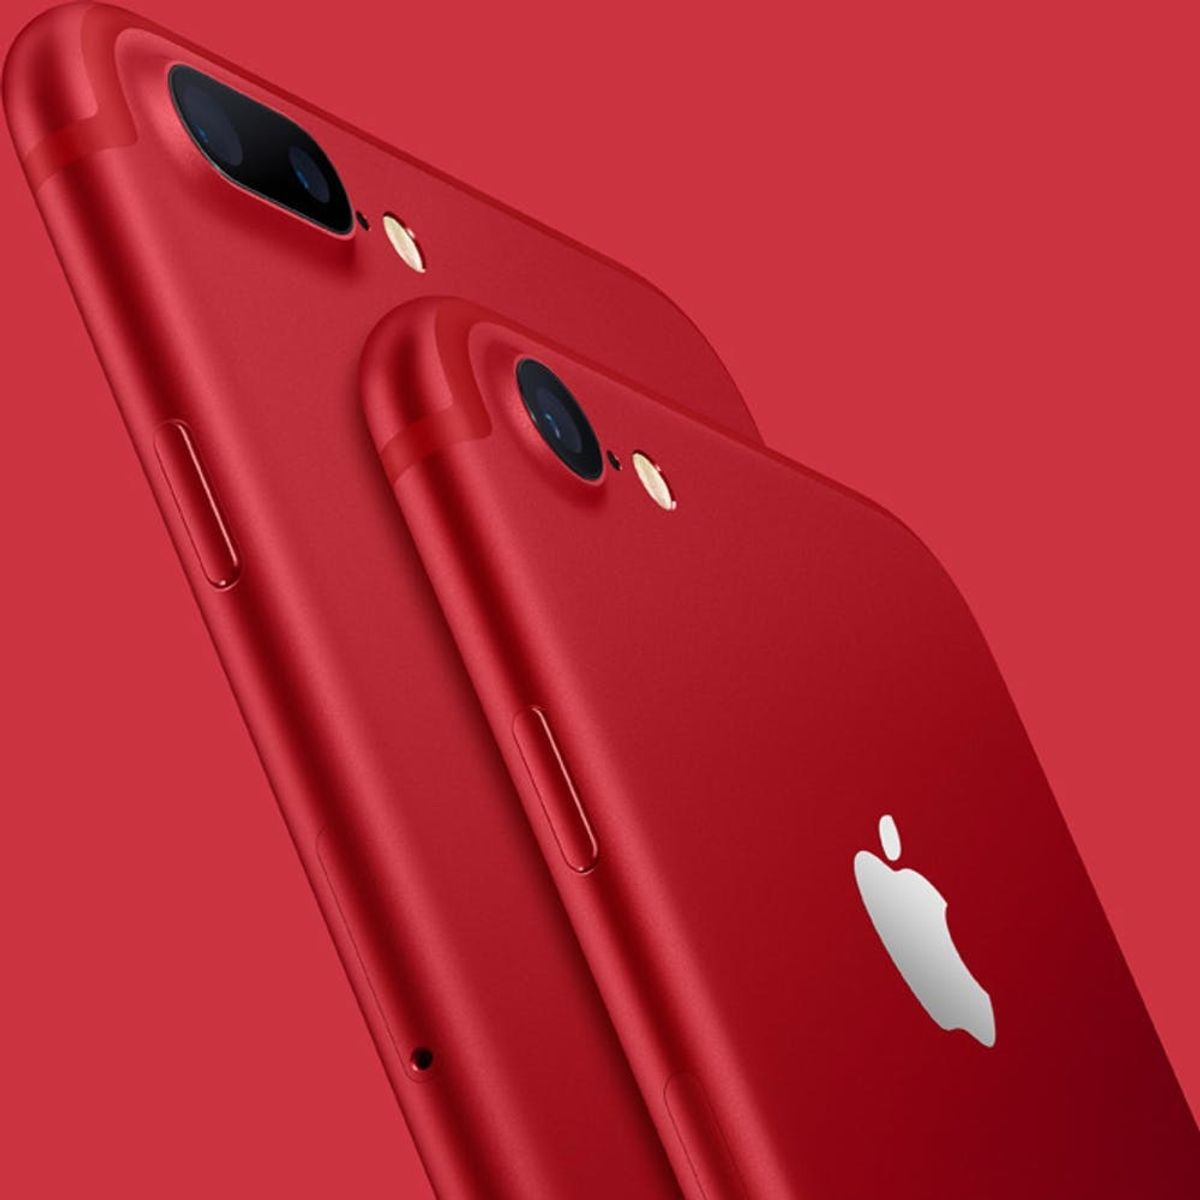 Apple Is Launching a New Red iPhone on Friday